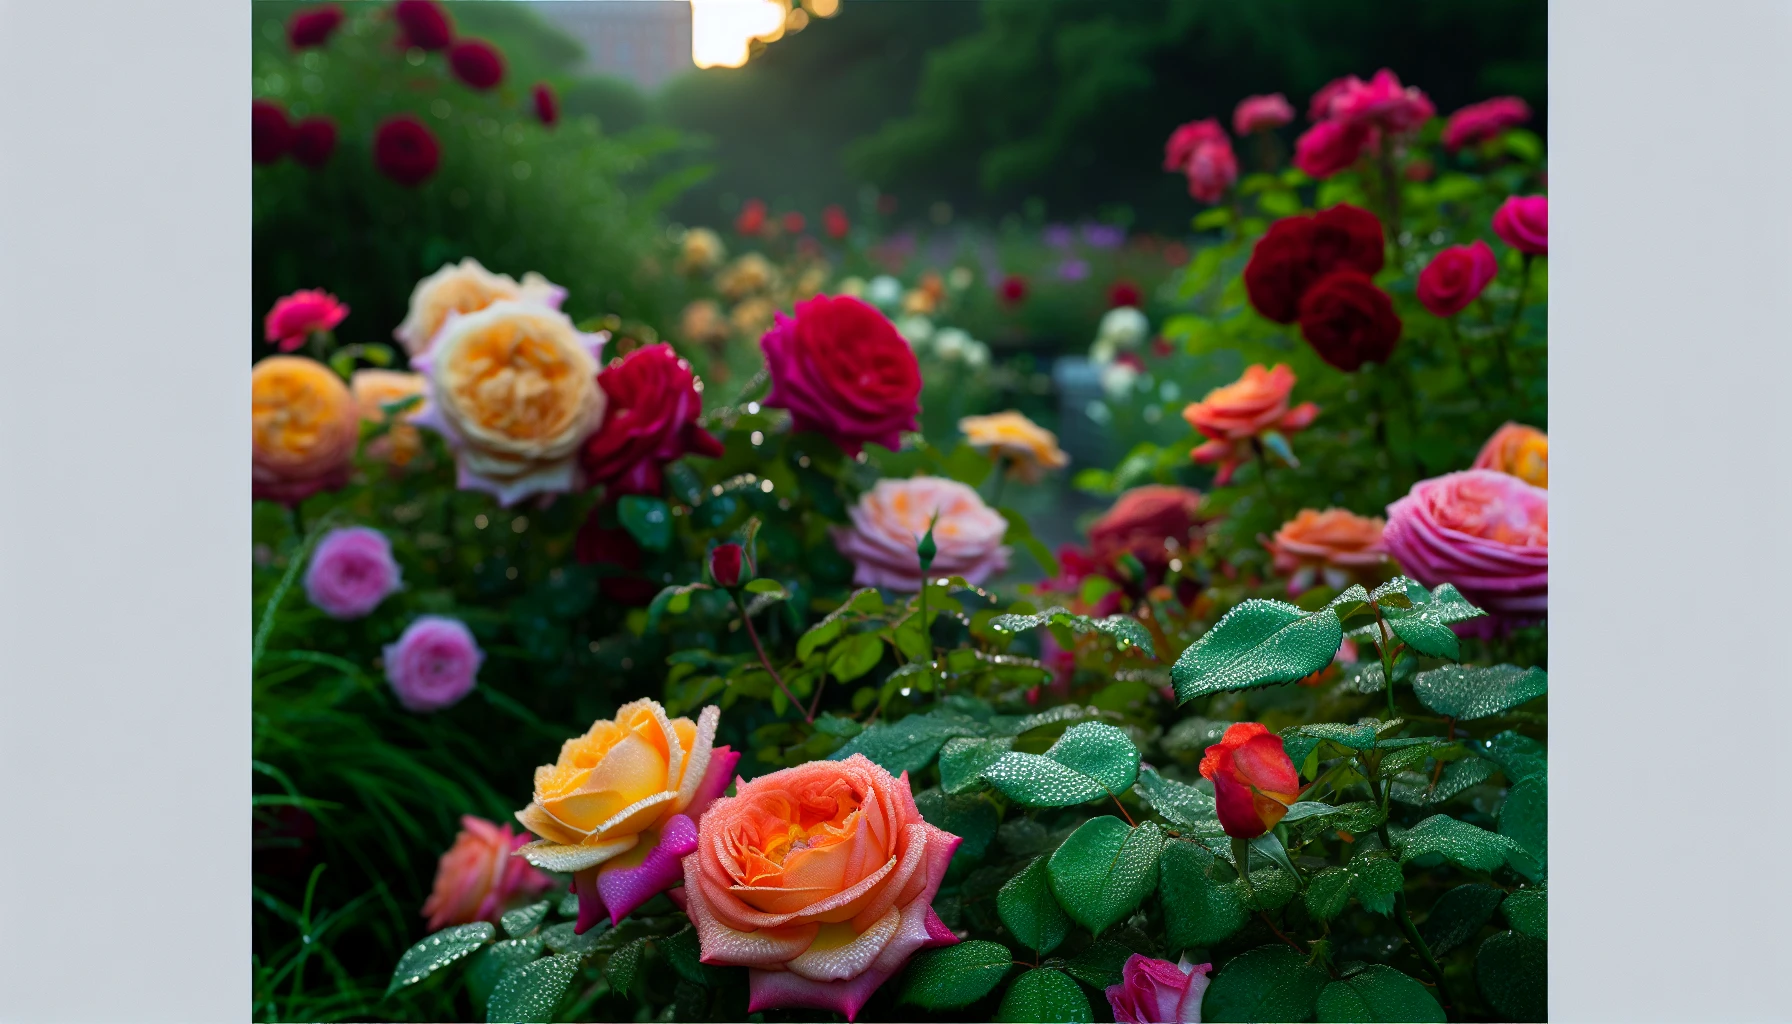 Various types of roses in a garden, showcasing the diverse rose varieties thriving in New York